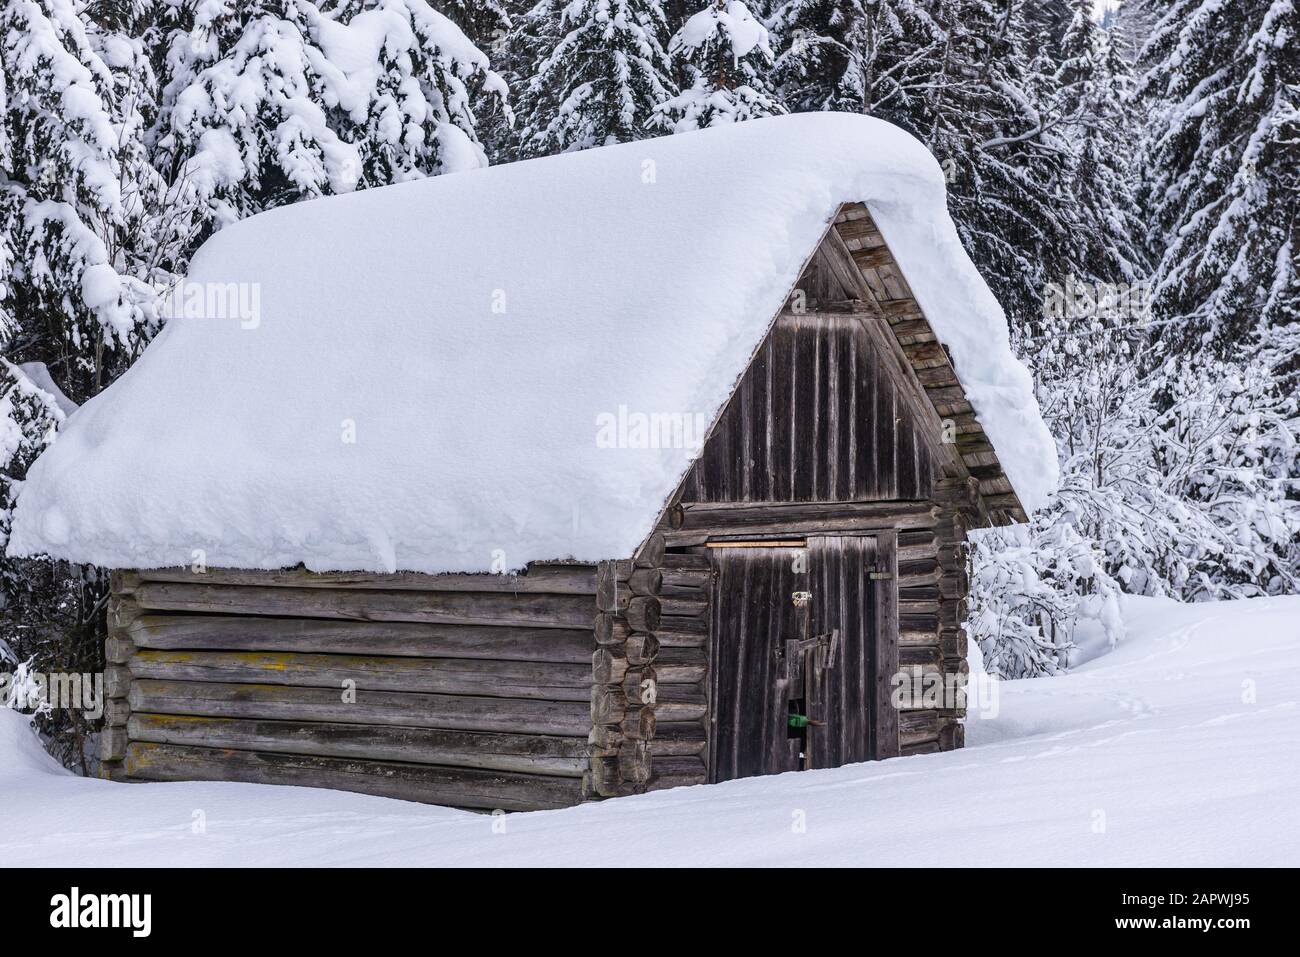 Wooden mountain shed, against the backdrop of snowy mountains and trees. Winter alpine landscape in Austria. Beautiful, natural background. Stock Photo